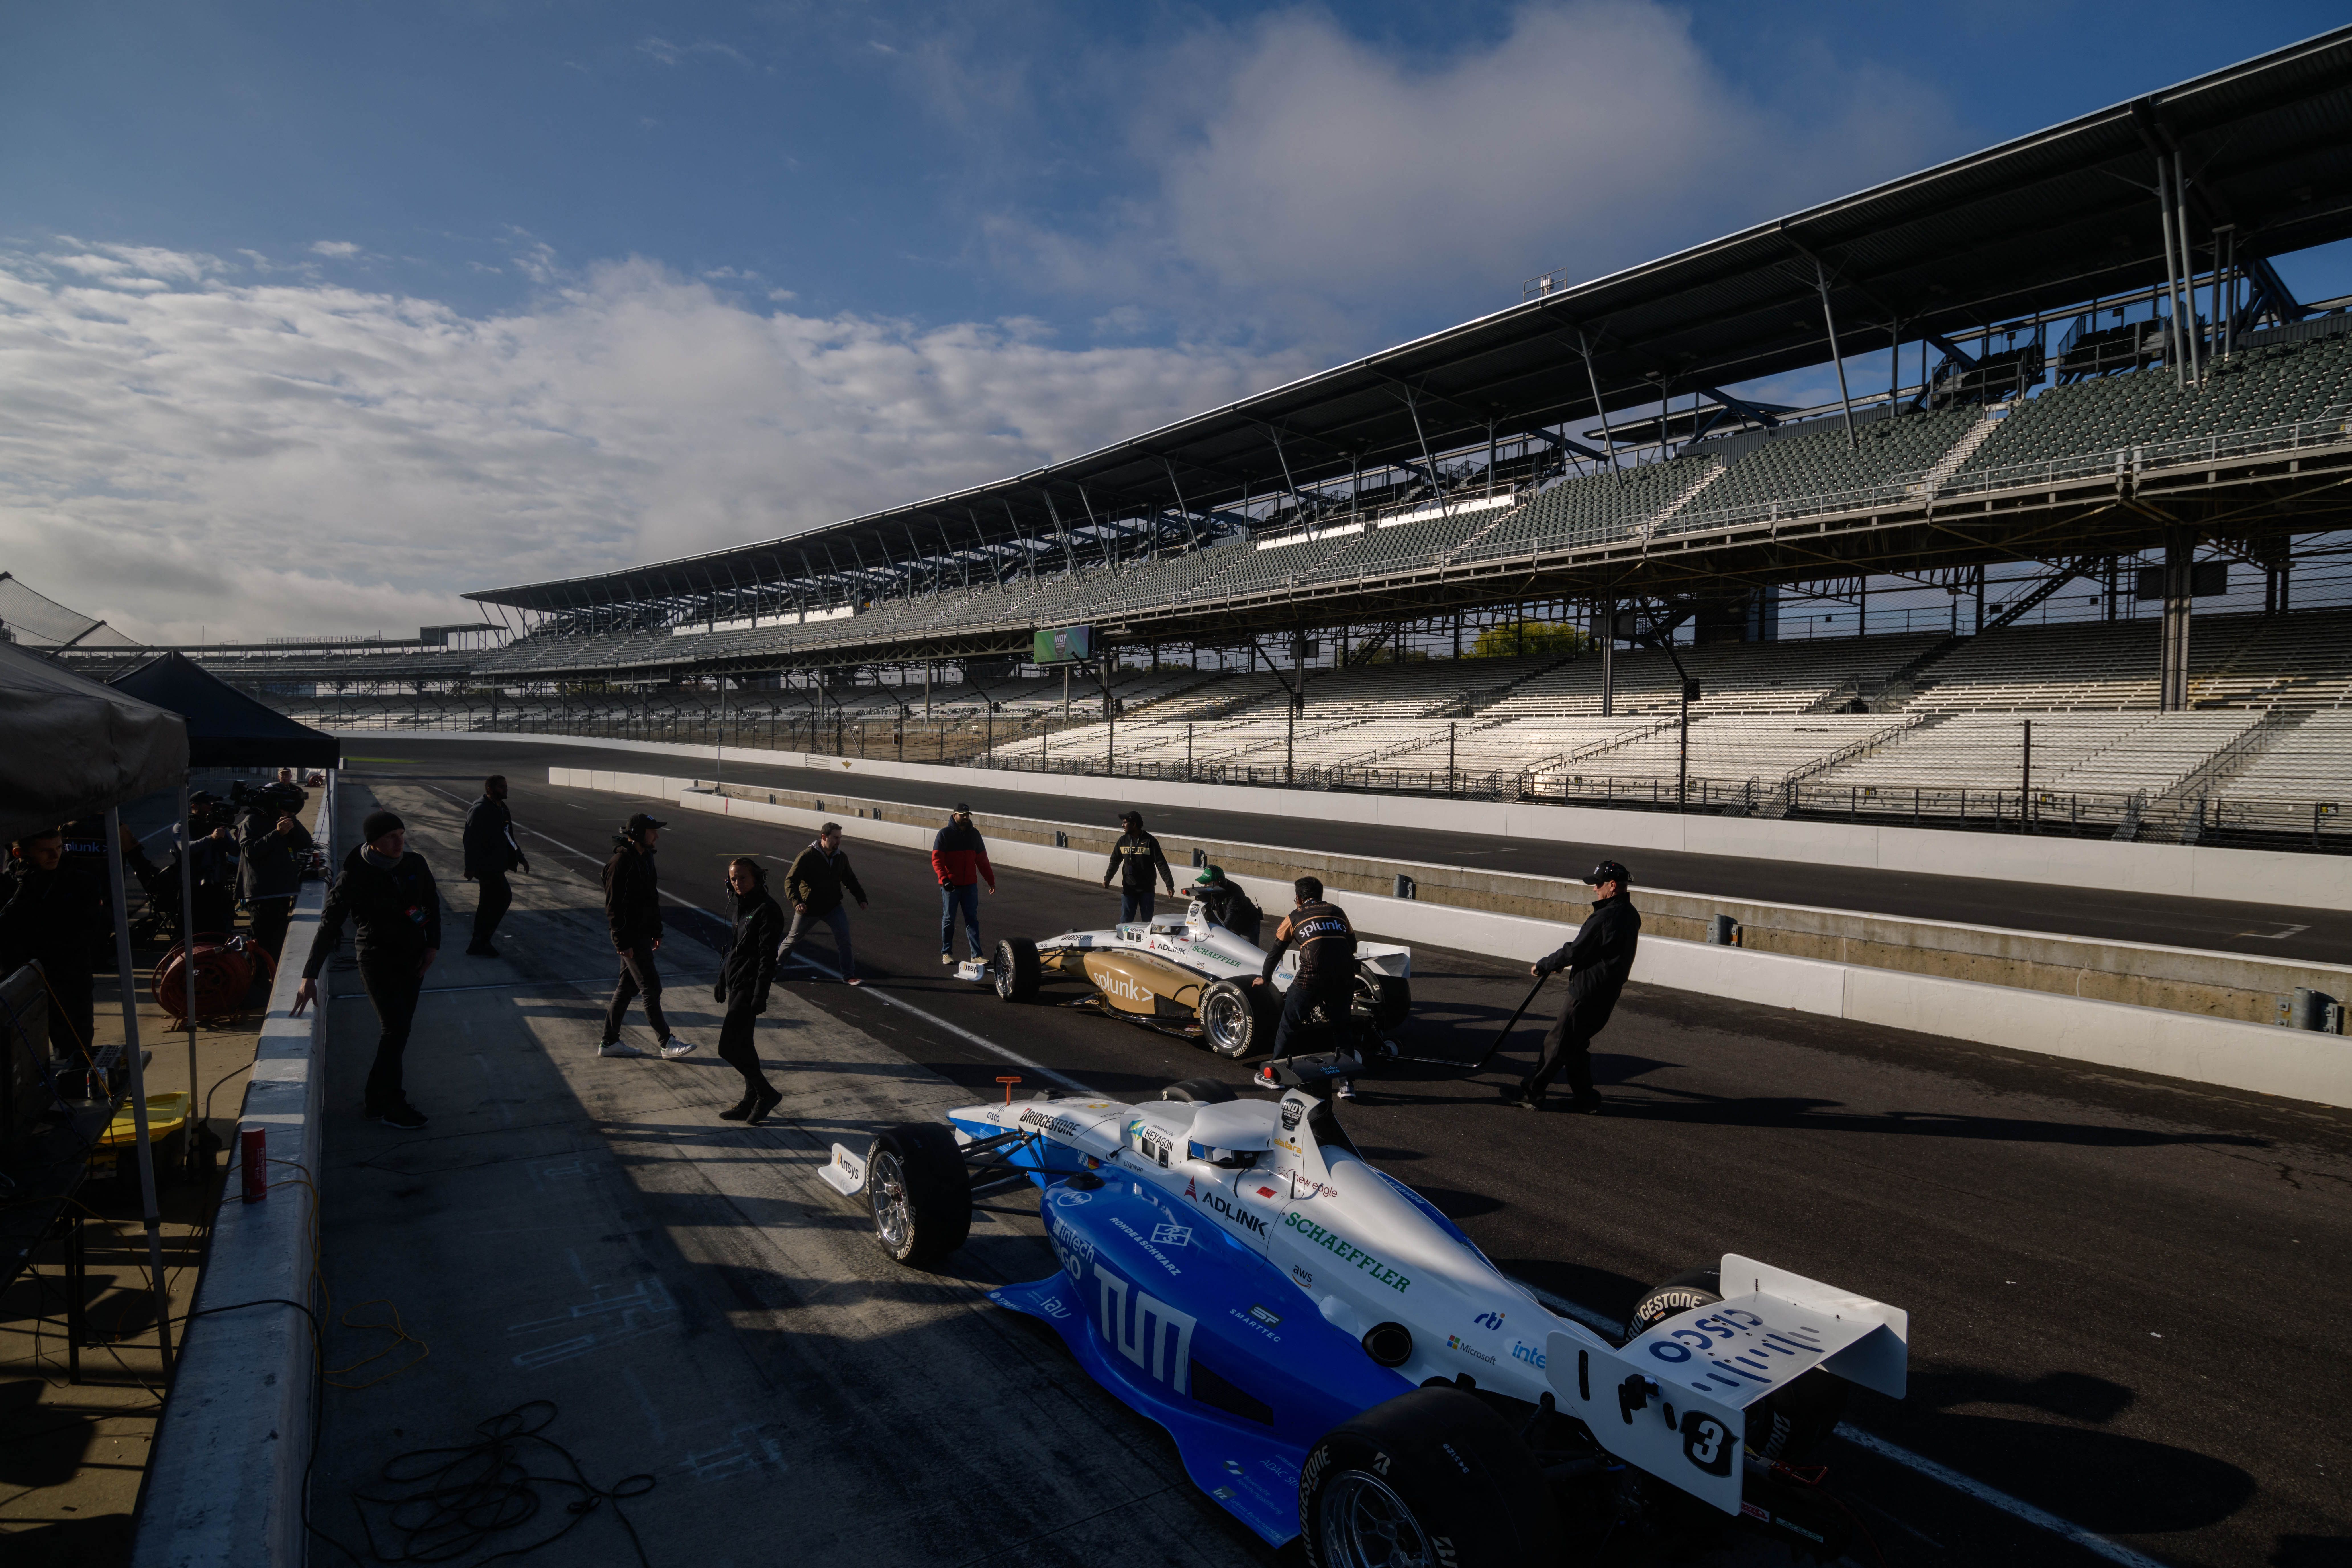   Cars are lined up on the grid during a practice session of the Indy Autonomous Challenge race on Oct. 23. 